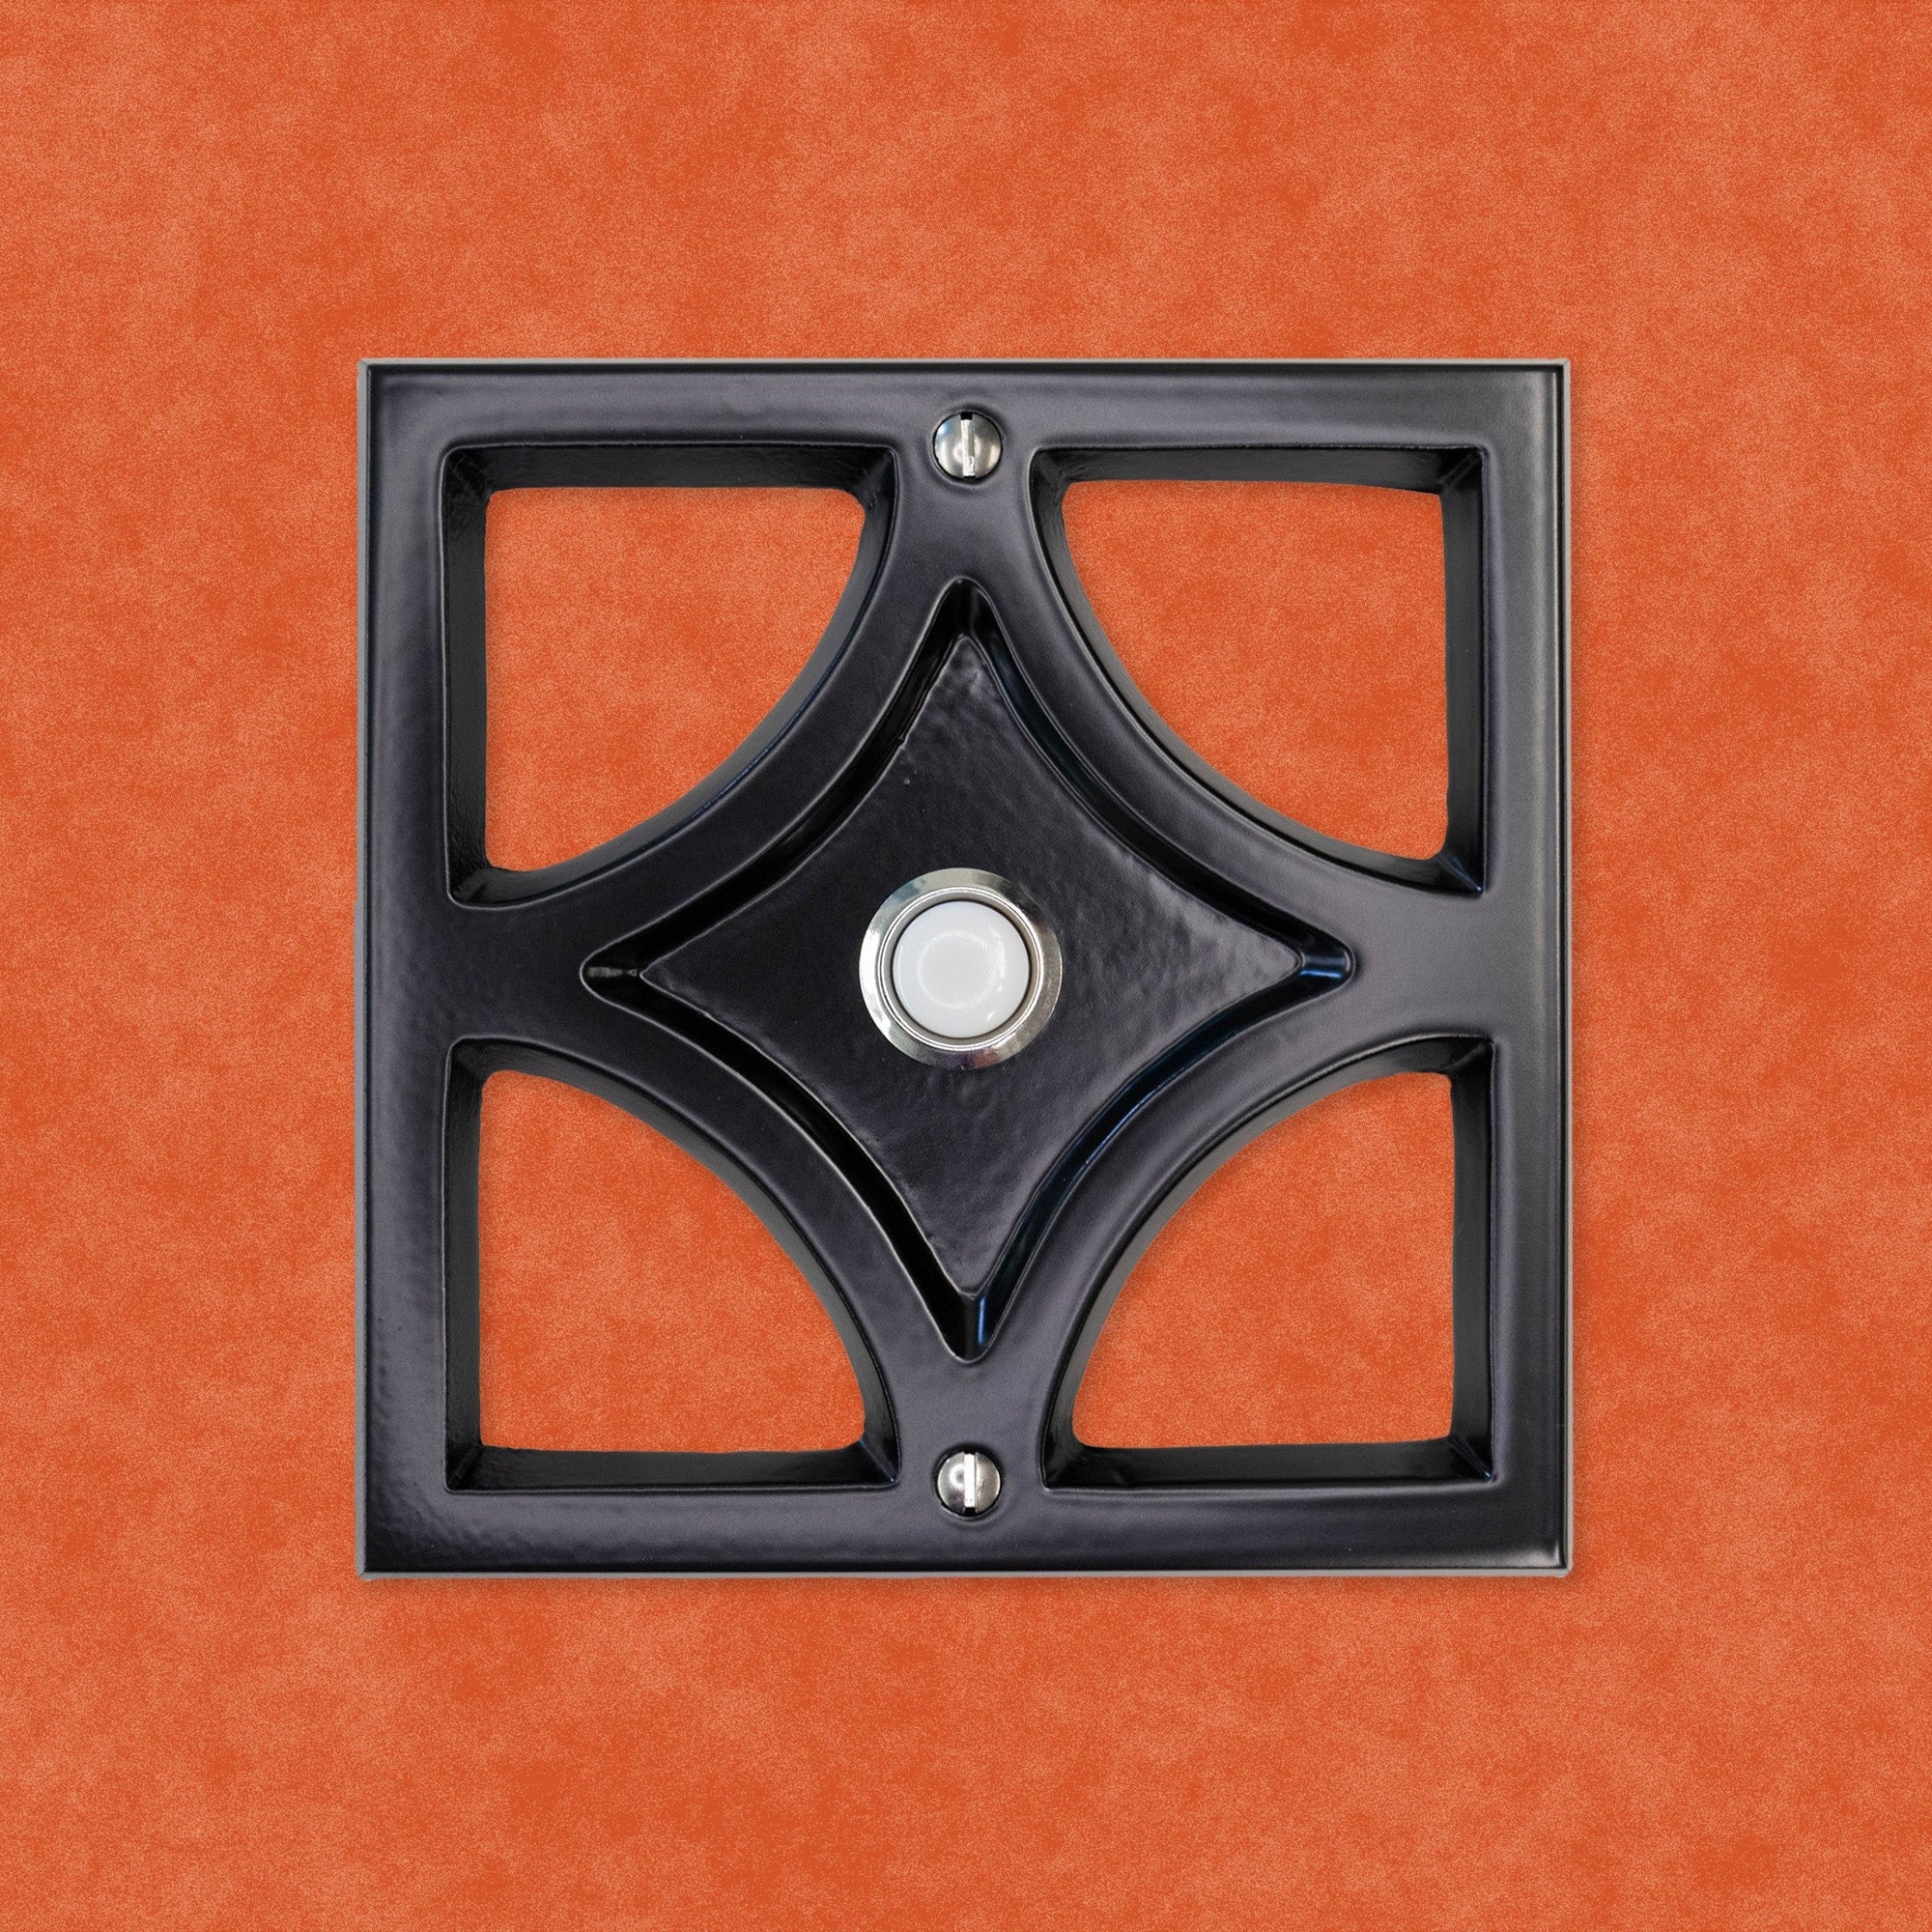 A black powder coated cast aluminum breeze block with a silver rimmed door bell button and screws. The breeze block design is a square around the outside, then inside is a diamond shape leaving 4 hollow corners. The middle of the diamond is sunken in and that is where the doorbell button is.  There are two silver screws, one at the top and bottom of the square. The black powder coating is matte, so it is smooth and reflects light but is does not give a glossy shine.